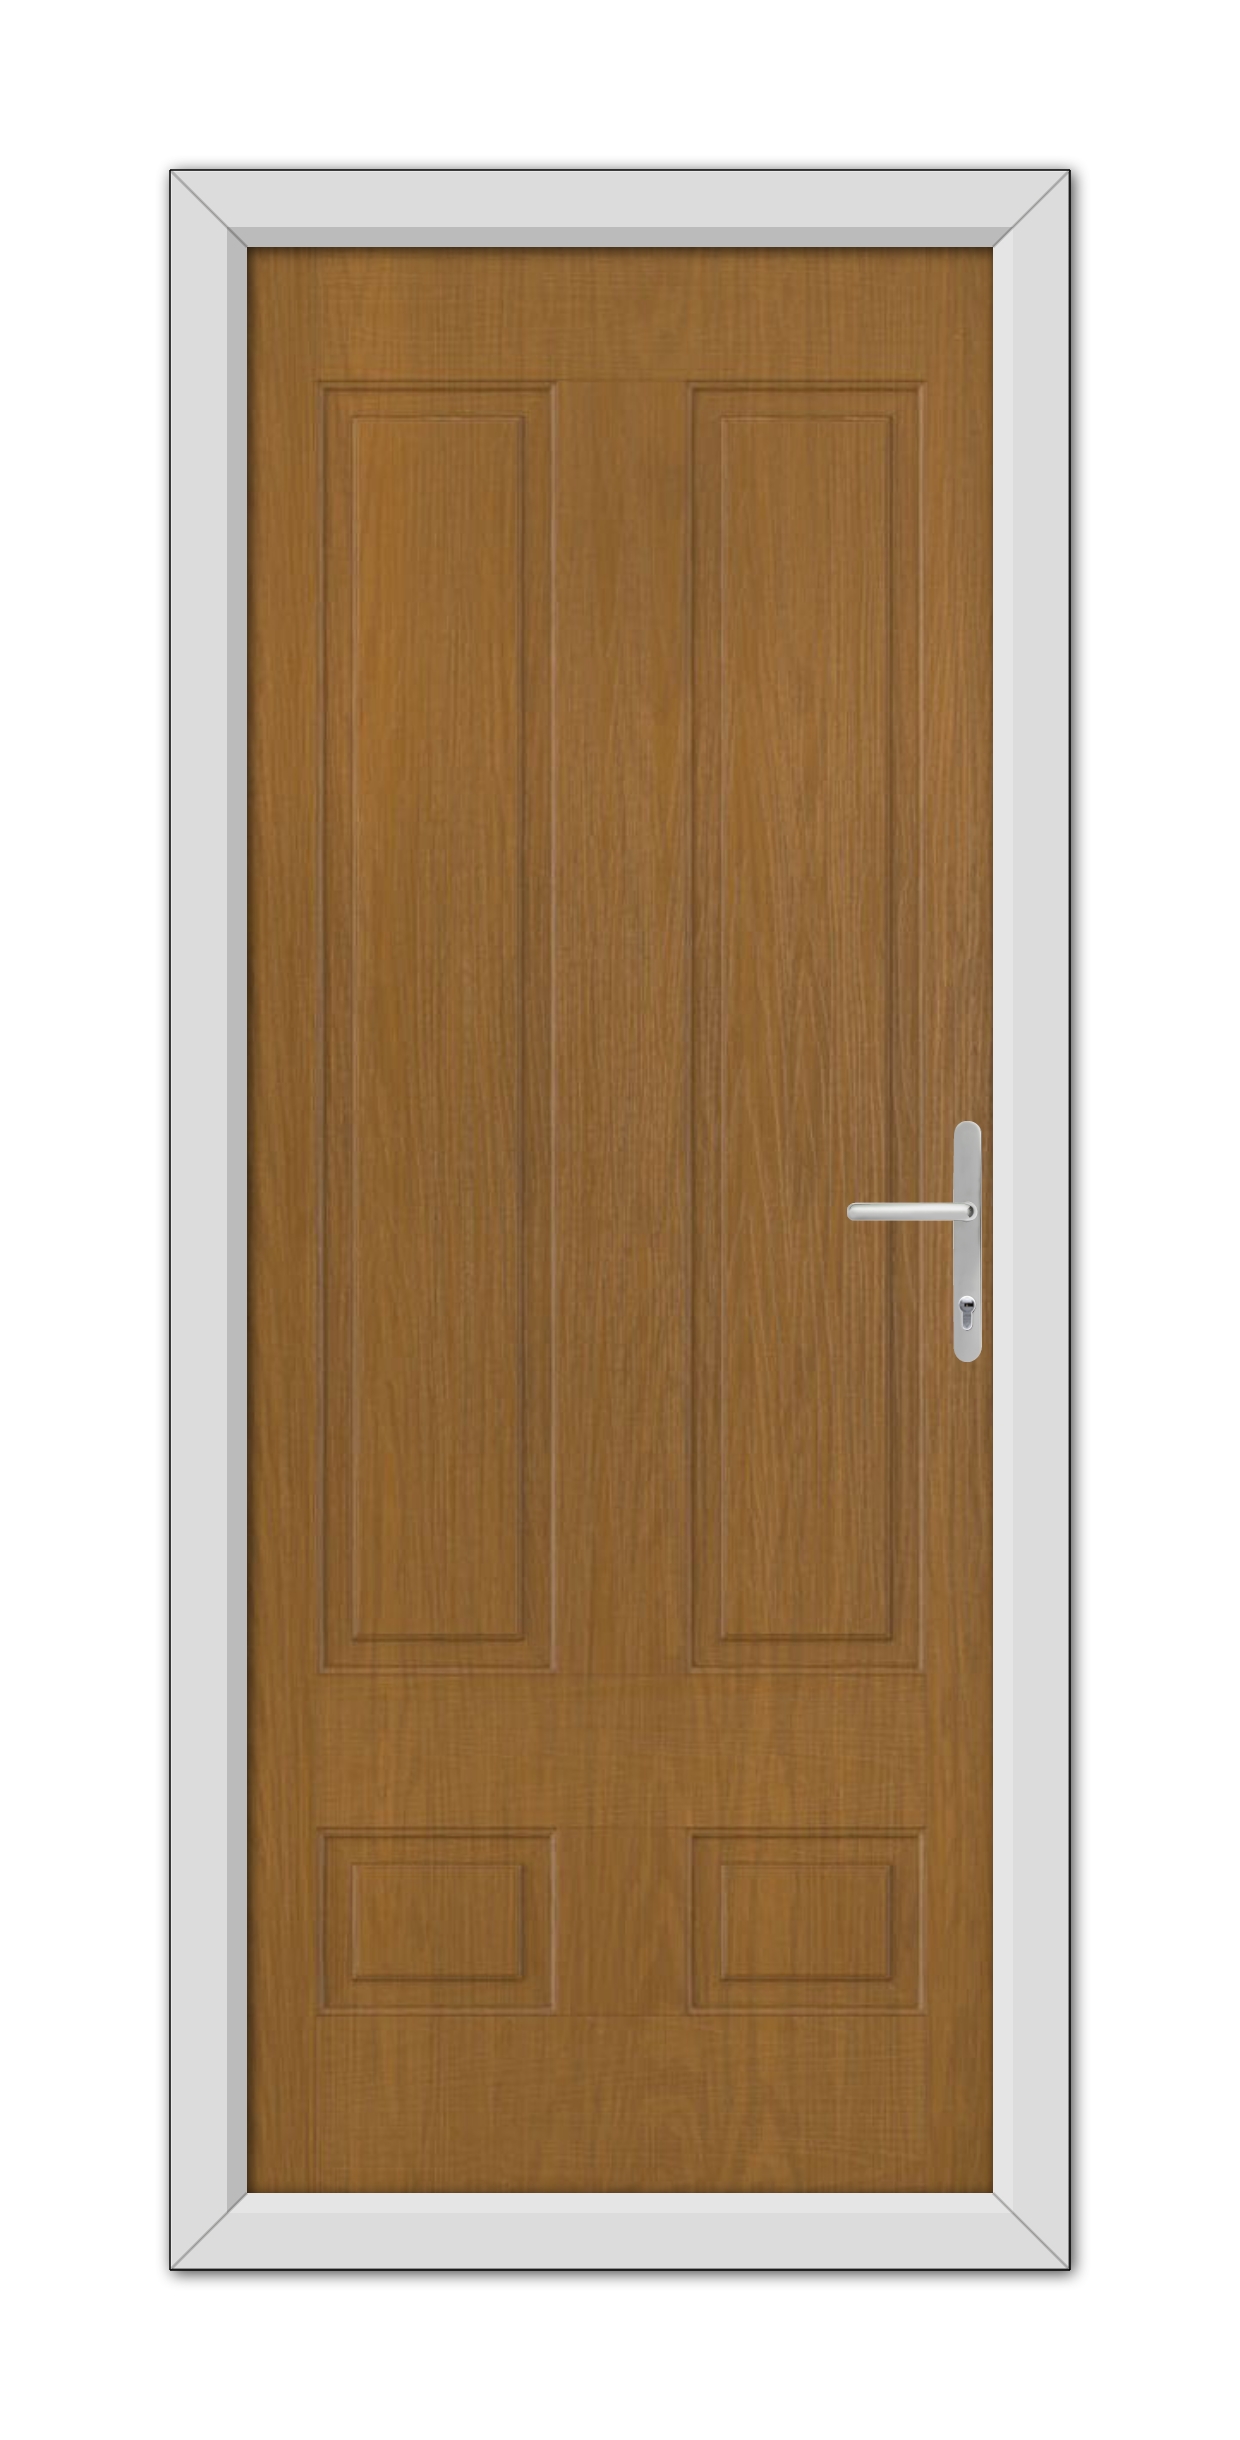 Oak Aston Solid Composite Door 48mm Timber Core with a metal handle, framed within a white door frame, viewed frontally.